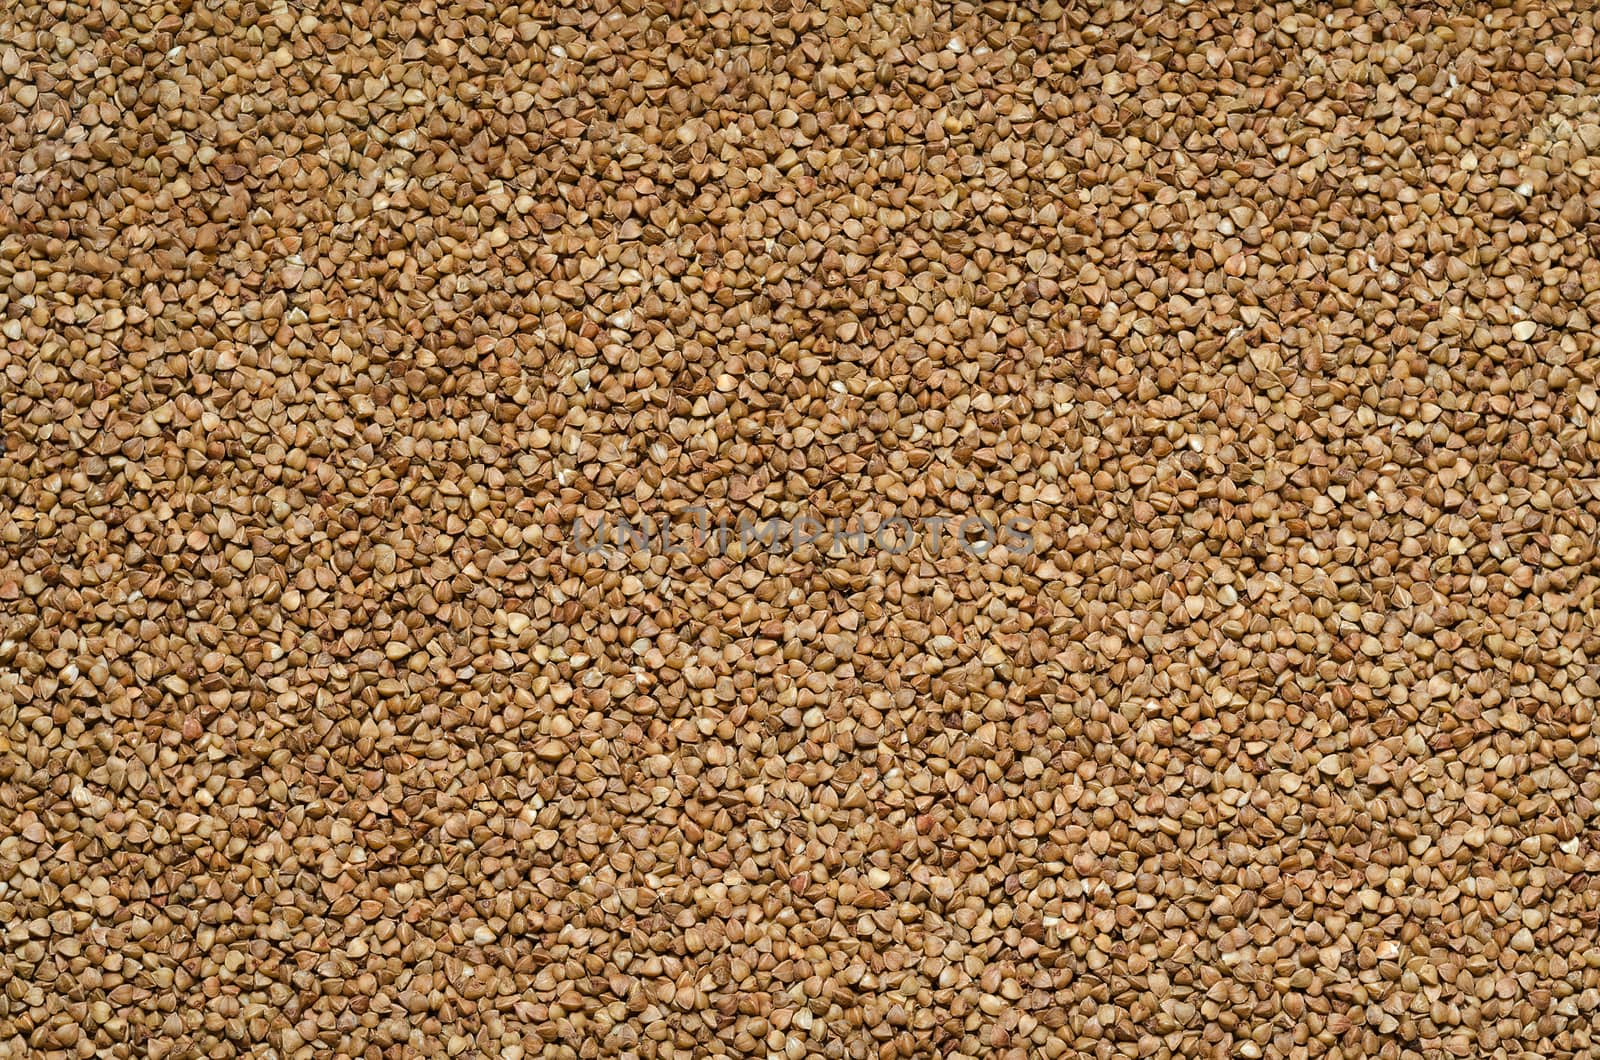 Textured background of buckwheat on scattered on the surface